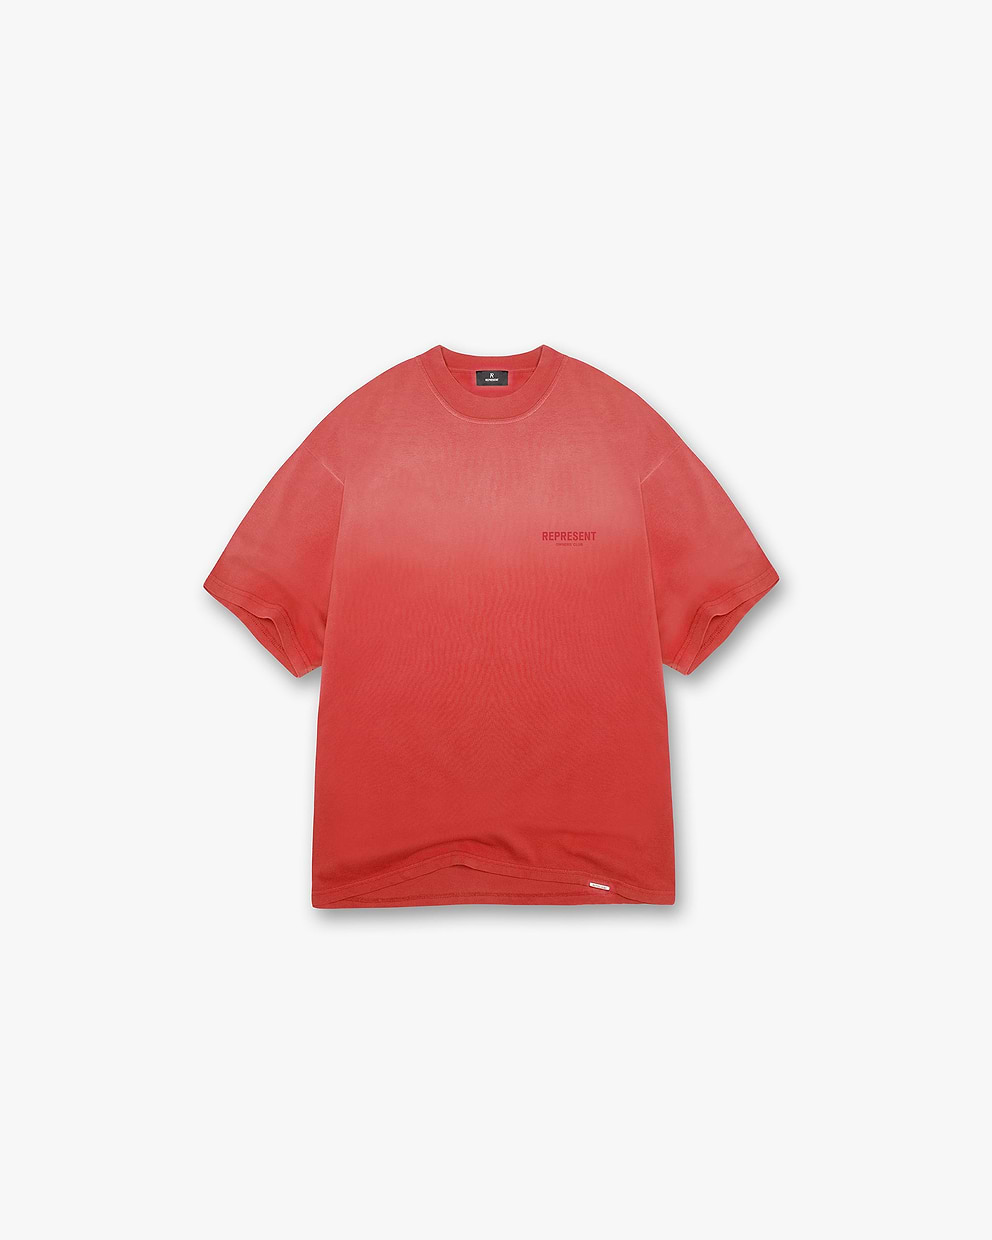 Represent Owners Club T-Shirt - Barbados Cherry